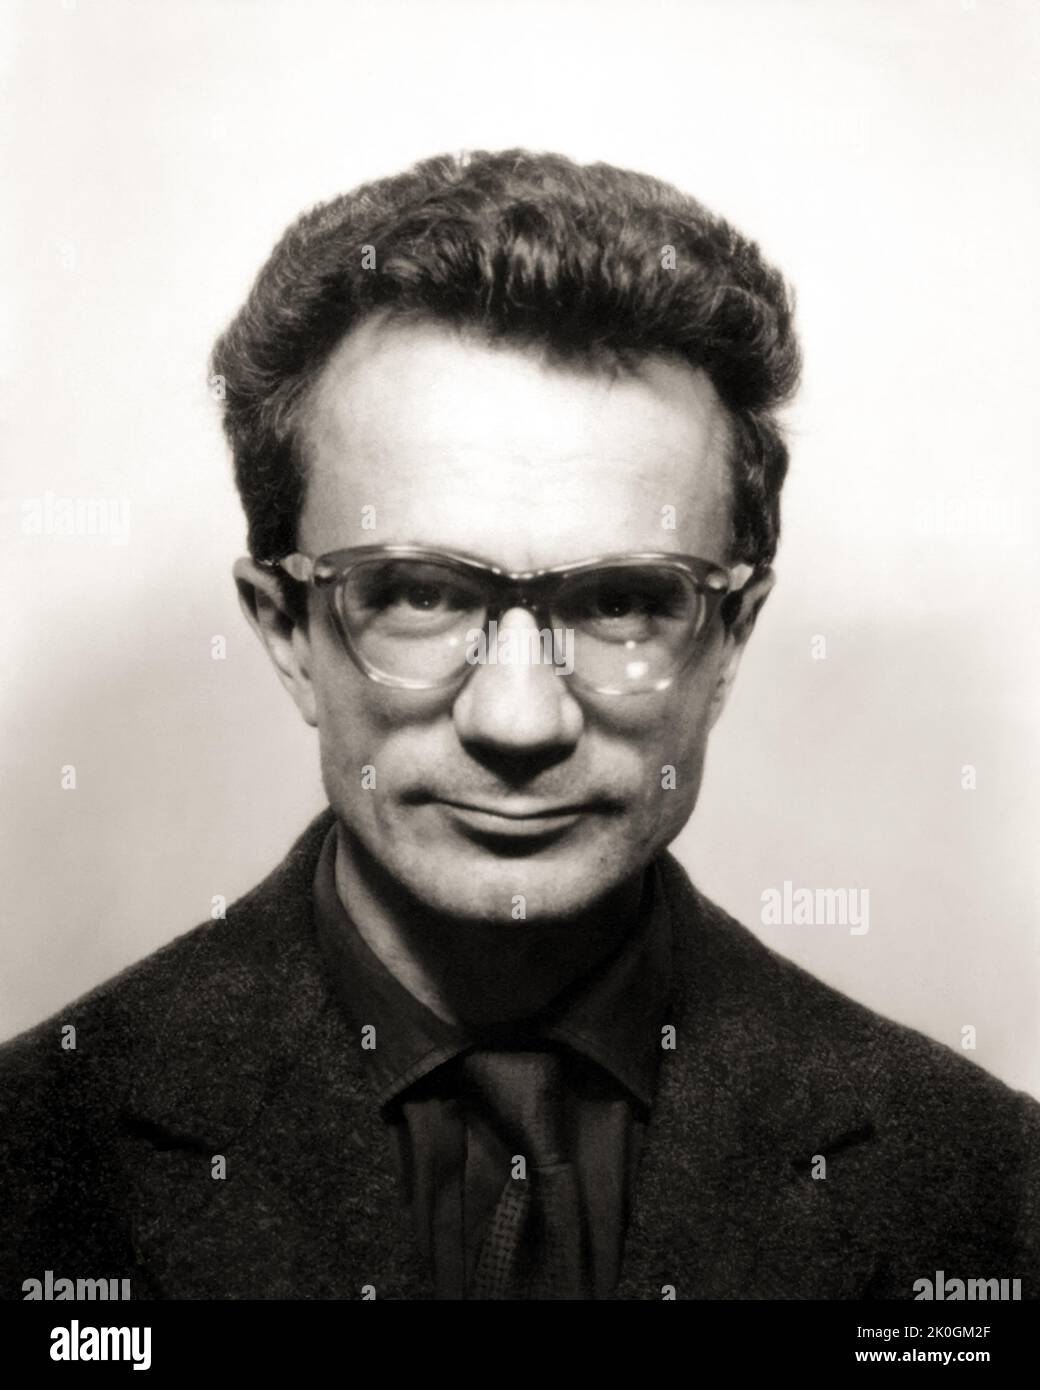 1962 ca, Roma , ITALY : The italian homosexual victim , poet , essayist , screenwriter , playwright , director and communist visual artist ALDO BRAIBANTI ( 1922 - 2014 ). He fought as a partisan in the Resistance, returning to his intellectual pursuits after the war, dedicating himself to visual arts, cinema, theater, and literature, as well to myrmecology and ecology . Accused, arrested, tried and convicted of ' plagiarism ' towards his lover Giovanni Sanfratello , with a sensational judicial affair since 1964 to 1968 . At last  Braibanti is sentenced to nine years, which become six on appeal Stock Photo